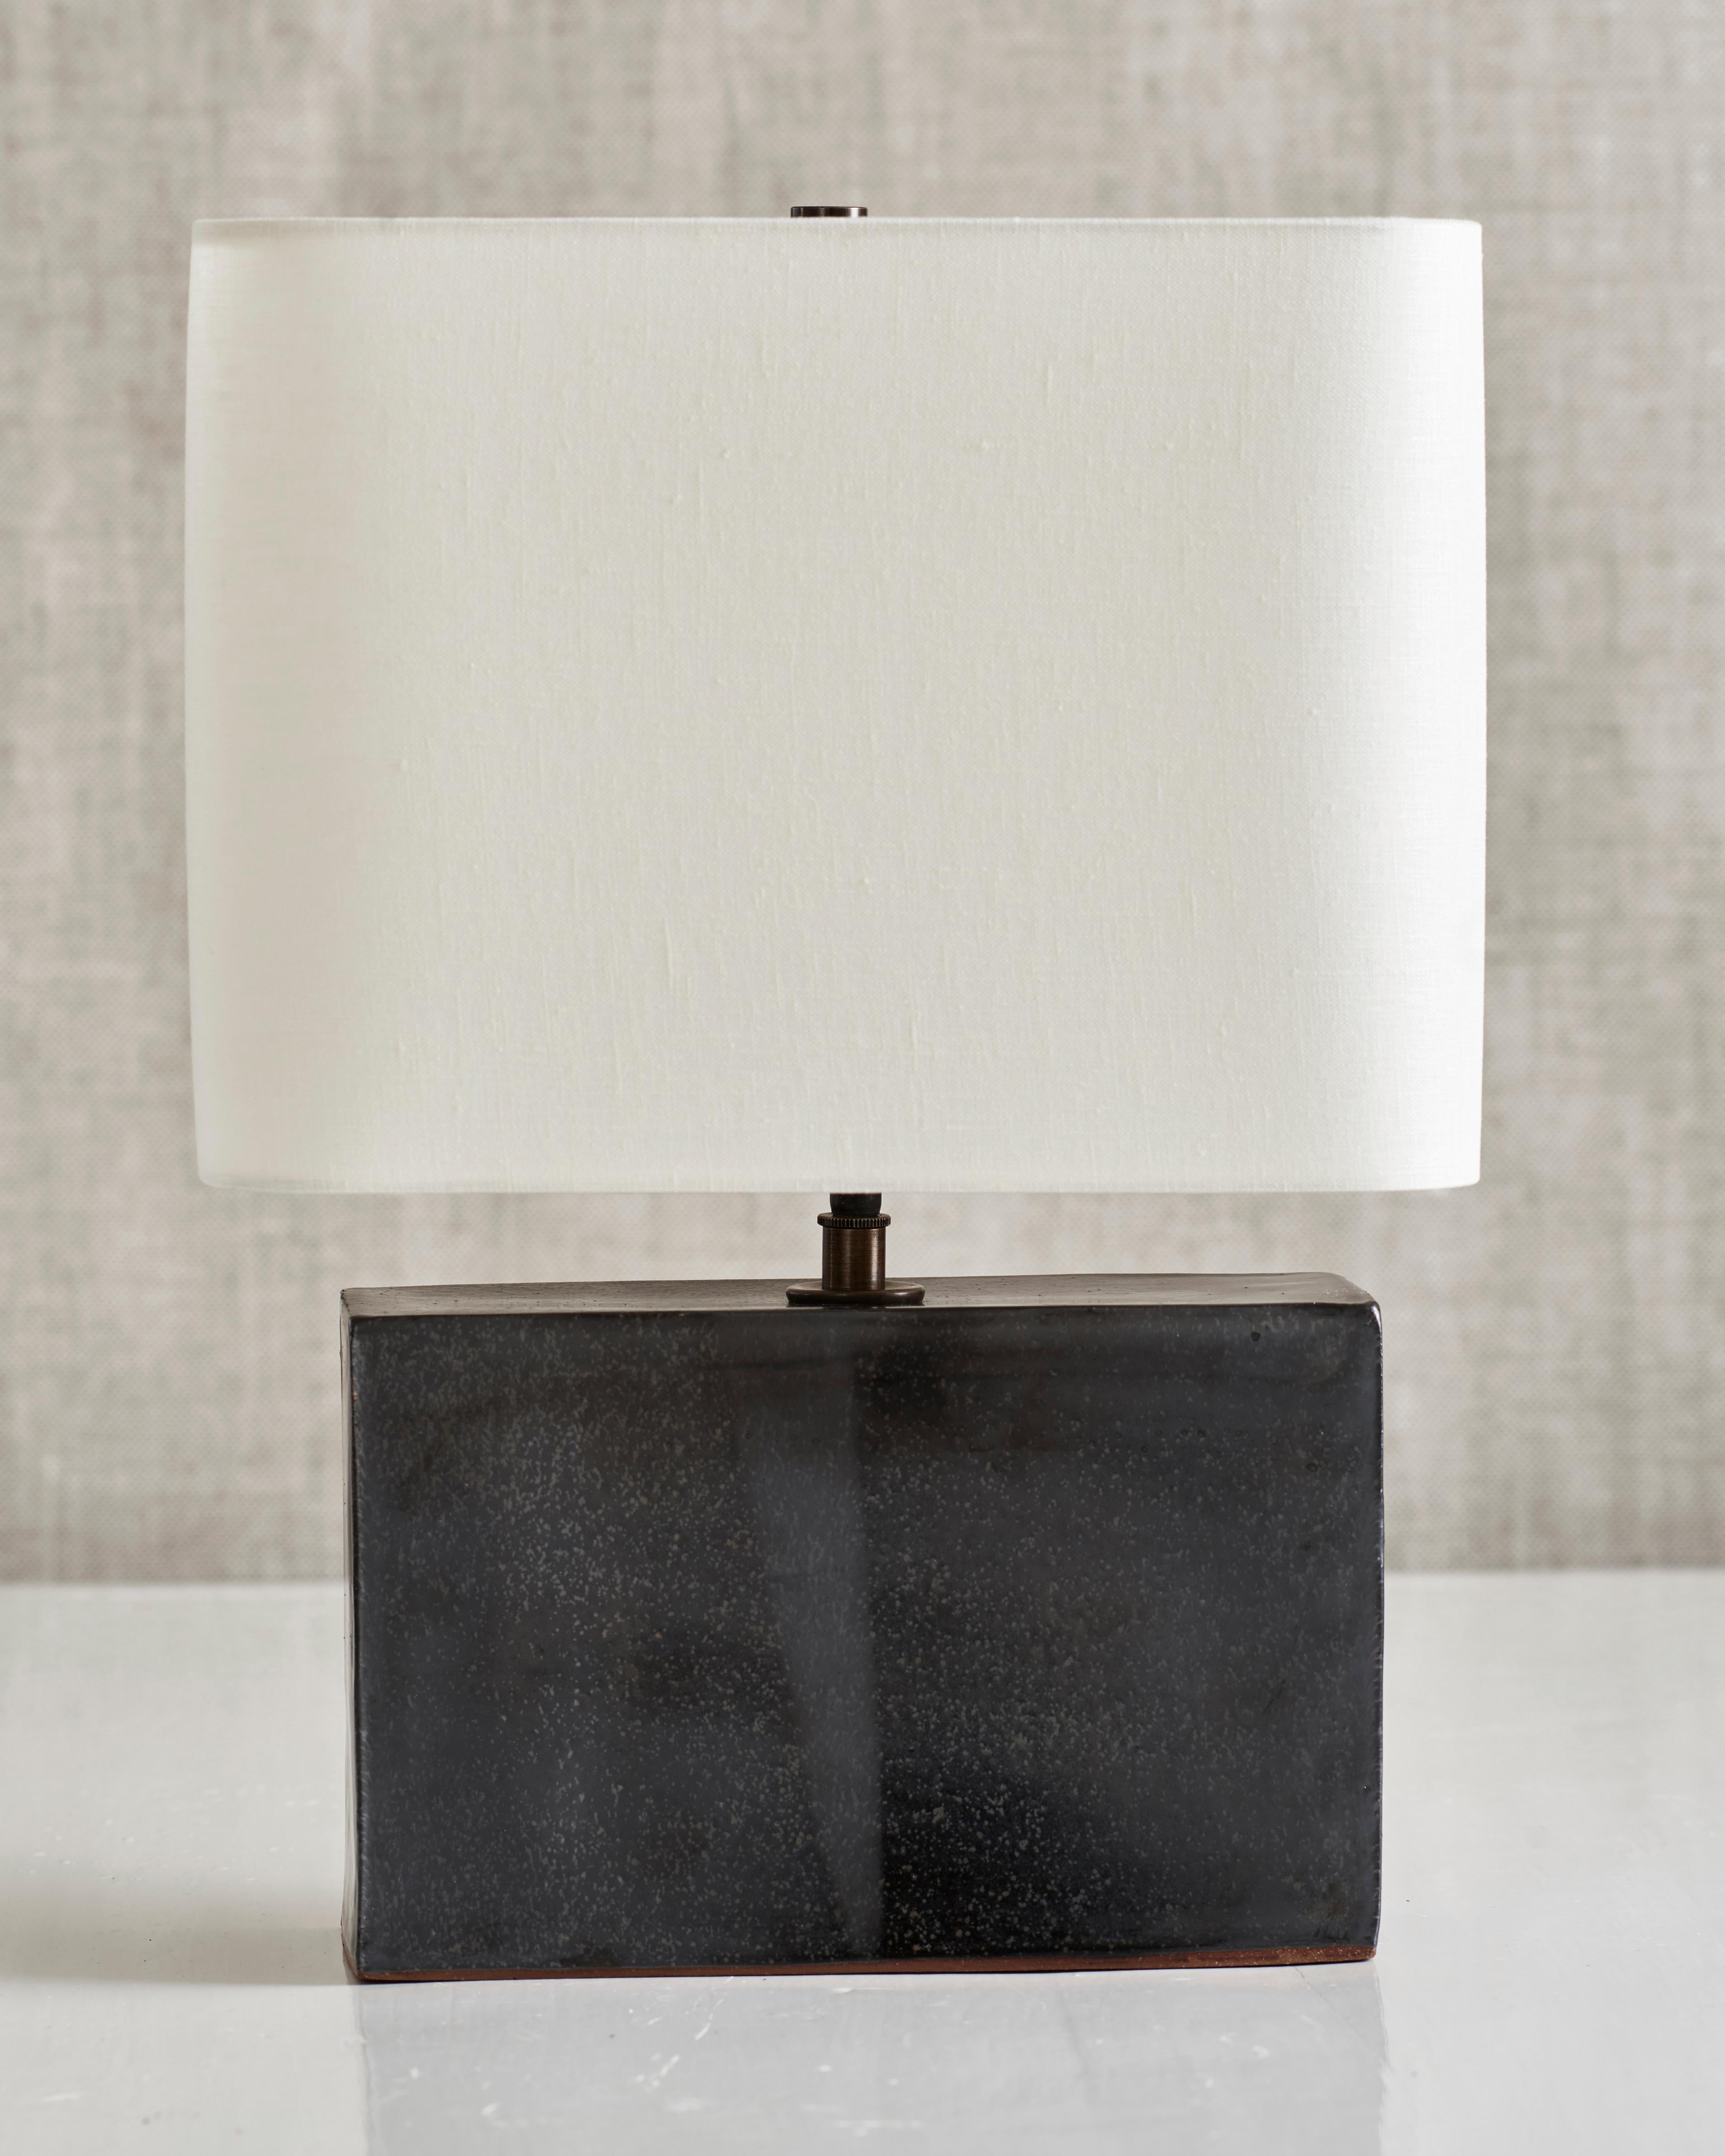 Handmade stoneware slab construction. Lamps are individually crafted and one of a kind.

Lead glaze. Antique brass fittings with braided black silk cord and off-white linen shade.

Box height 6.5”
Box width 10”
Box depth 3.75”
Shade width 12”